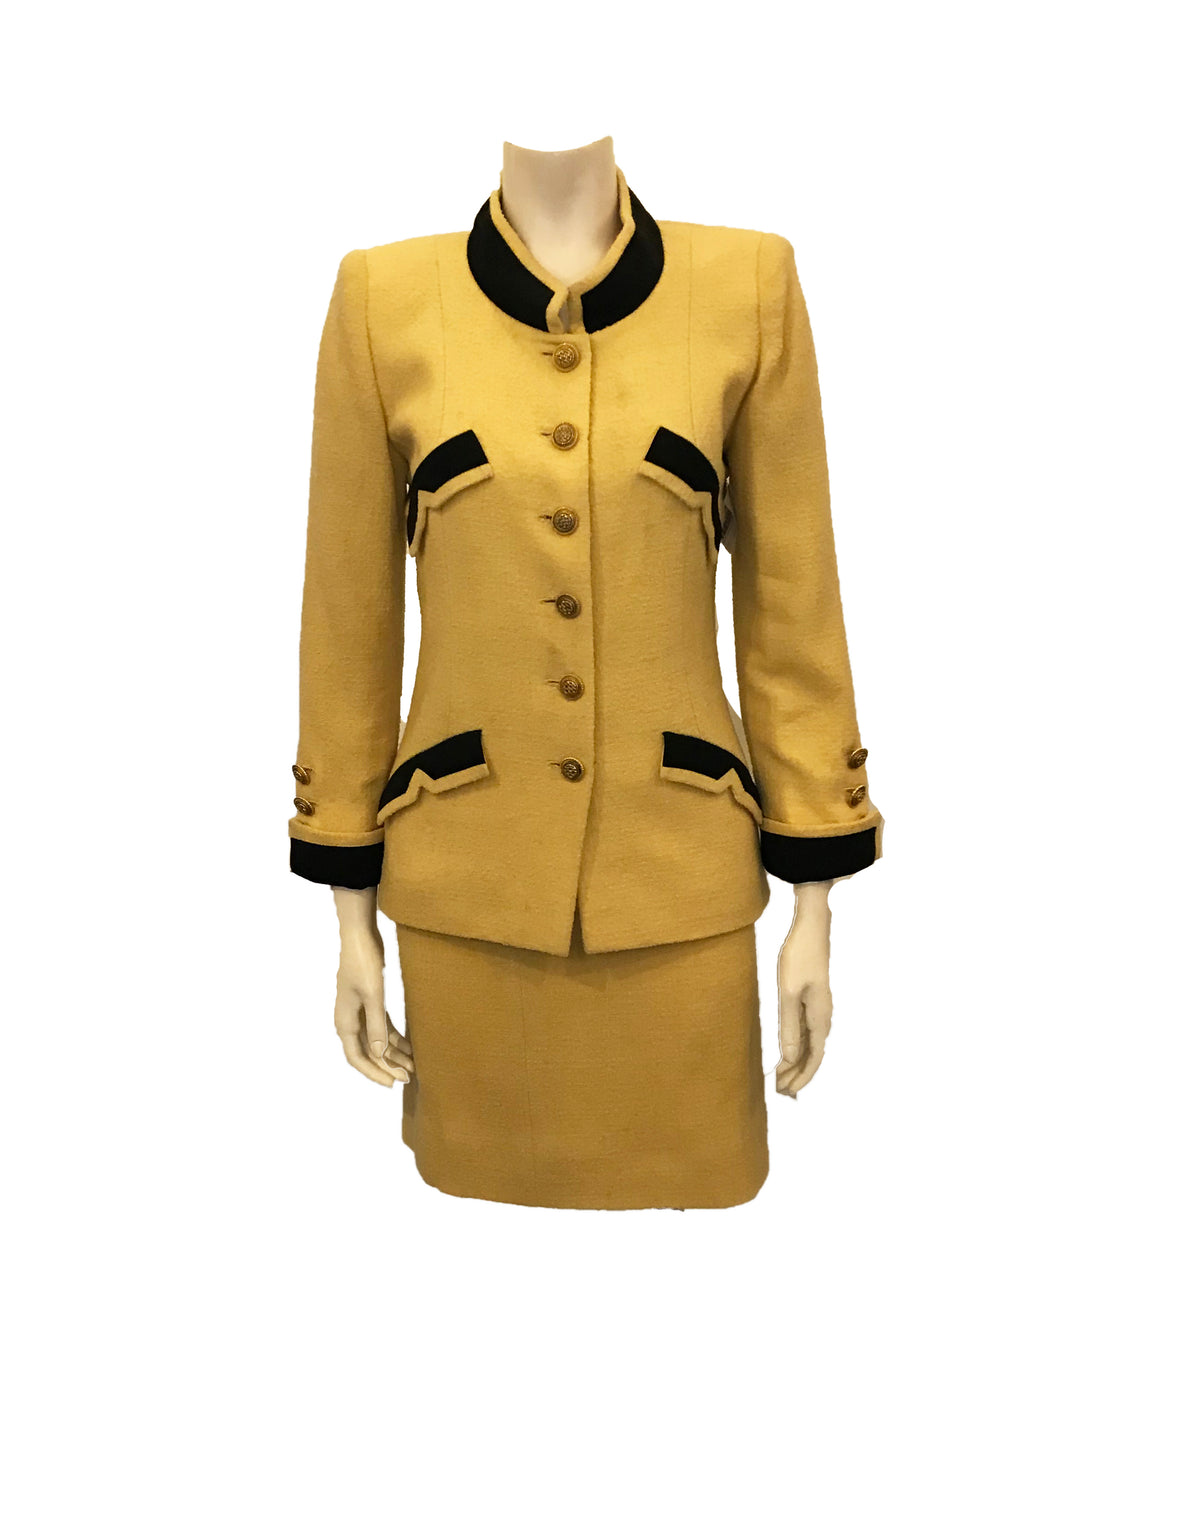 1980s Chanel Yellow Tweed Skirt Suit – Screaming Mimis Vintage Fashion